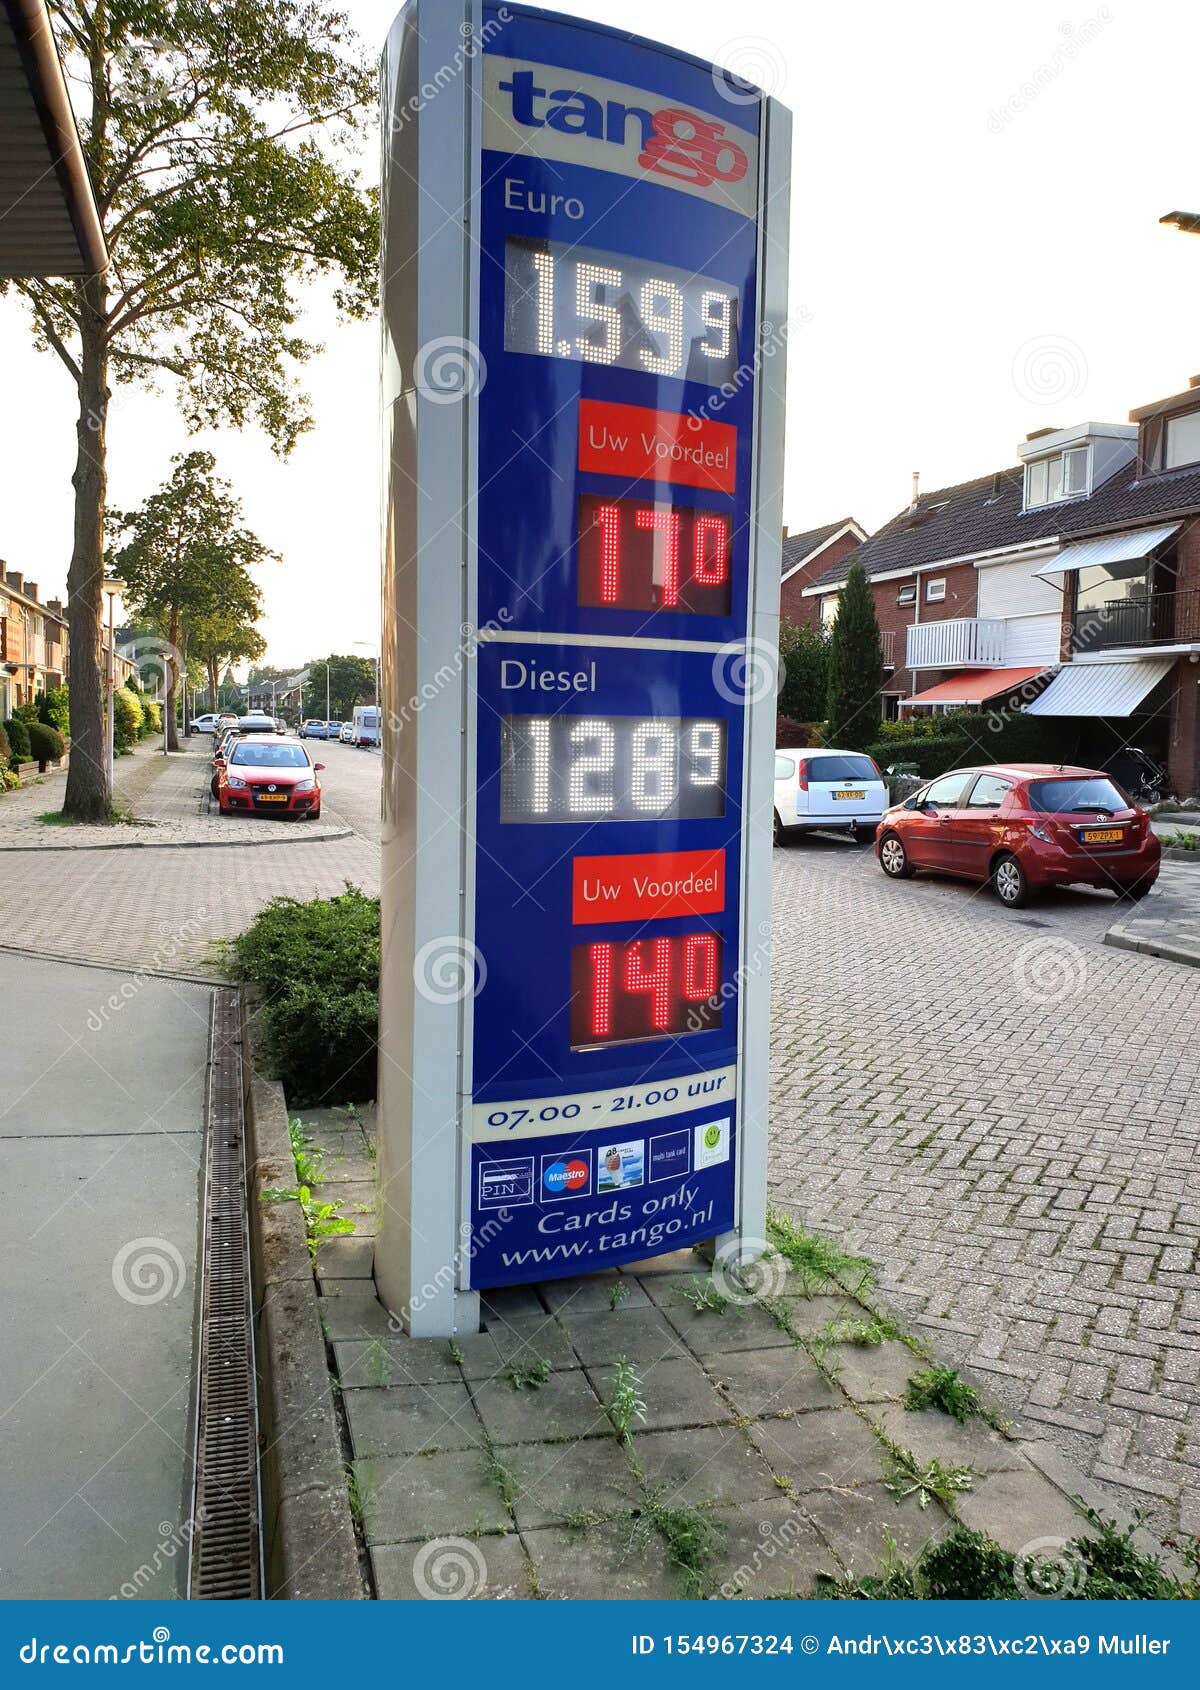 beven Handboek Rook Prices for Euro 95 and Diesel Fuel in Euro Per Liter in the Netherlands at  a Tango Petrol Station Editorial Stock Image - Image of petrol, fuel:  154967324